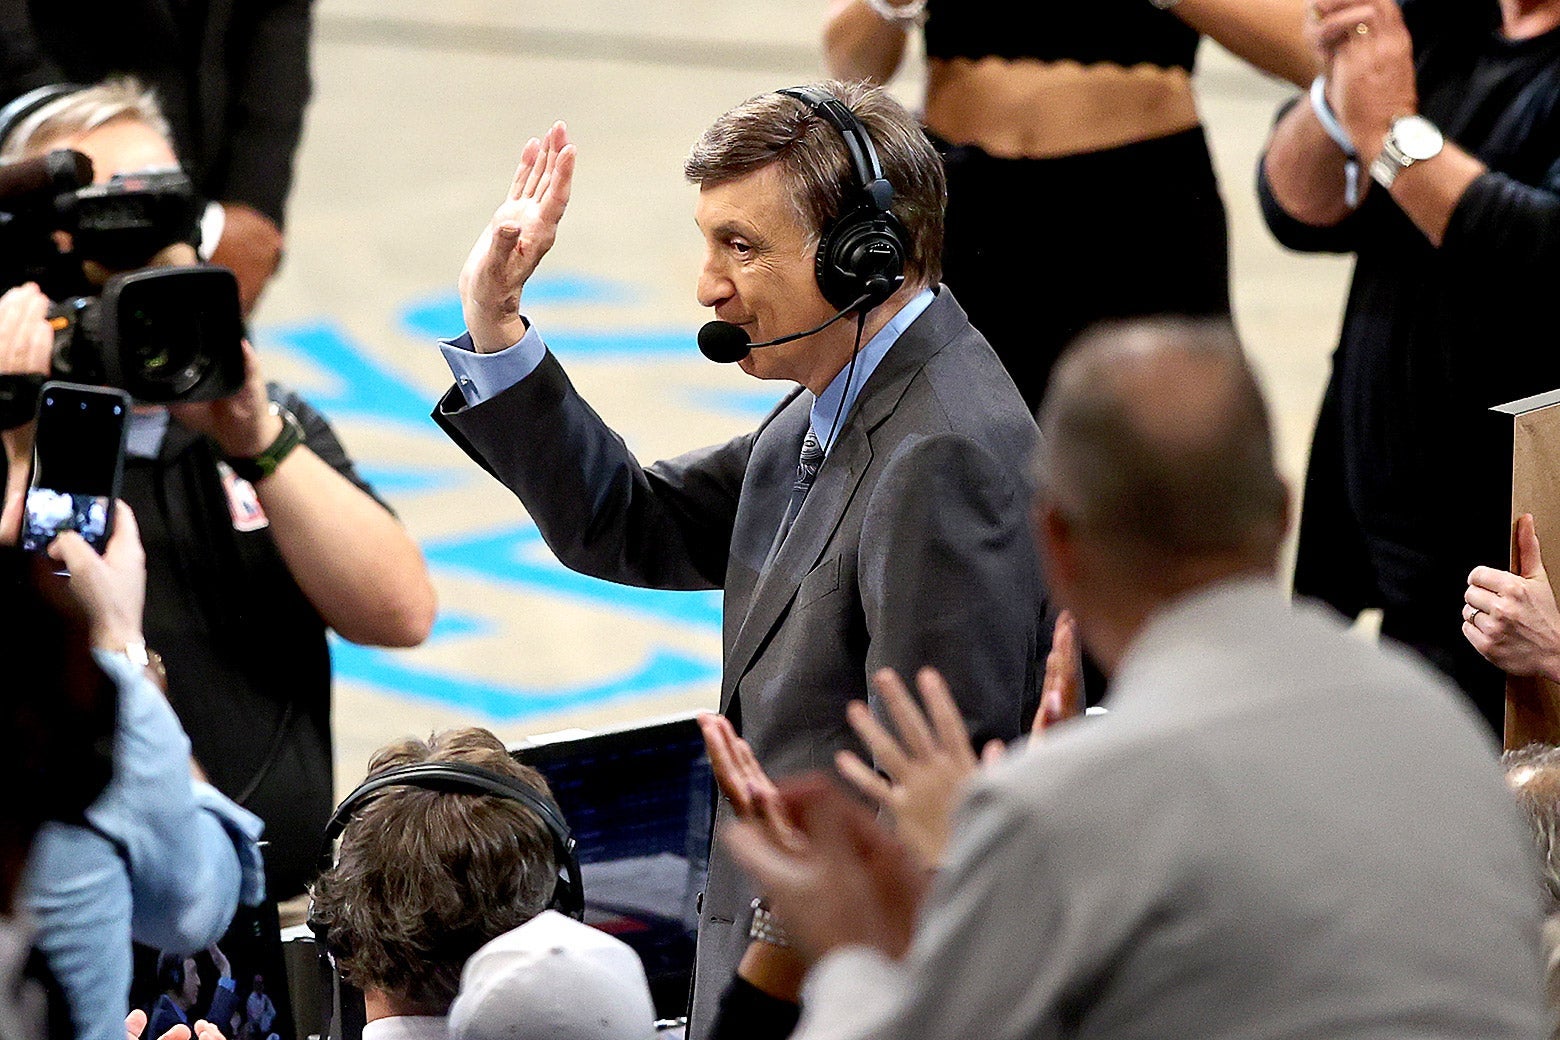 Marv Albert standing with headset on courtside, as the crowd cheers